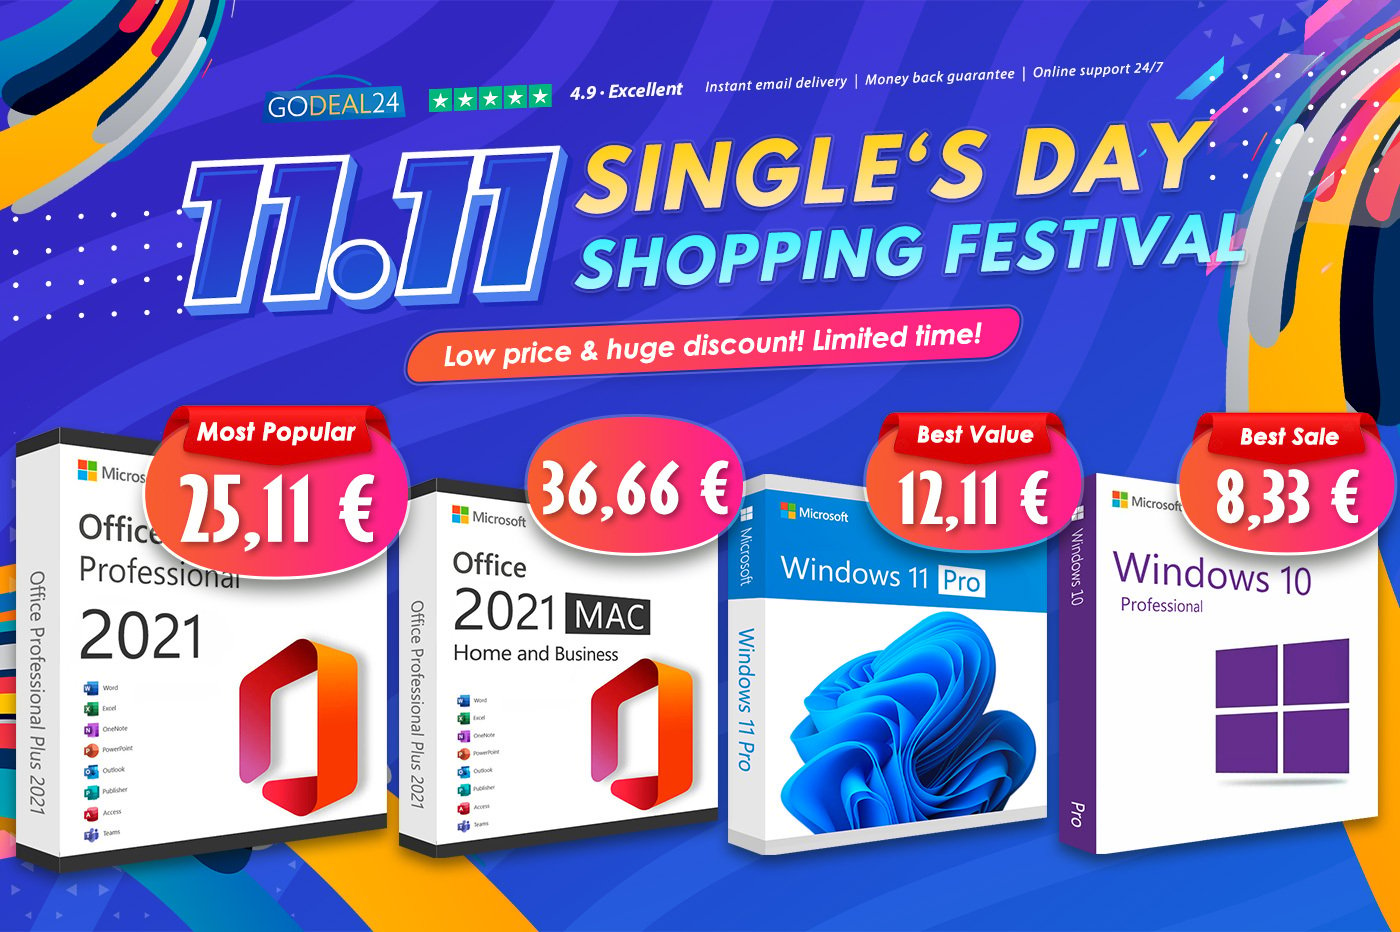 Godeal24 cracks the awards for Best Software for Single Day